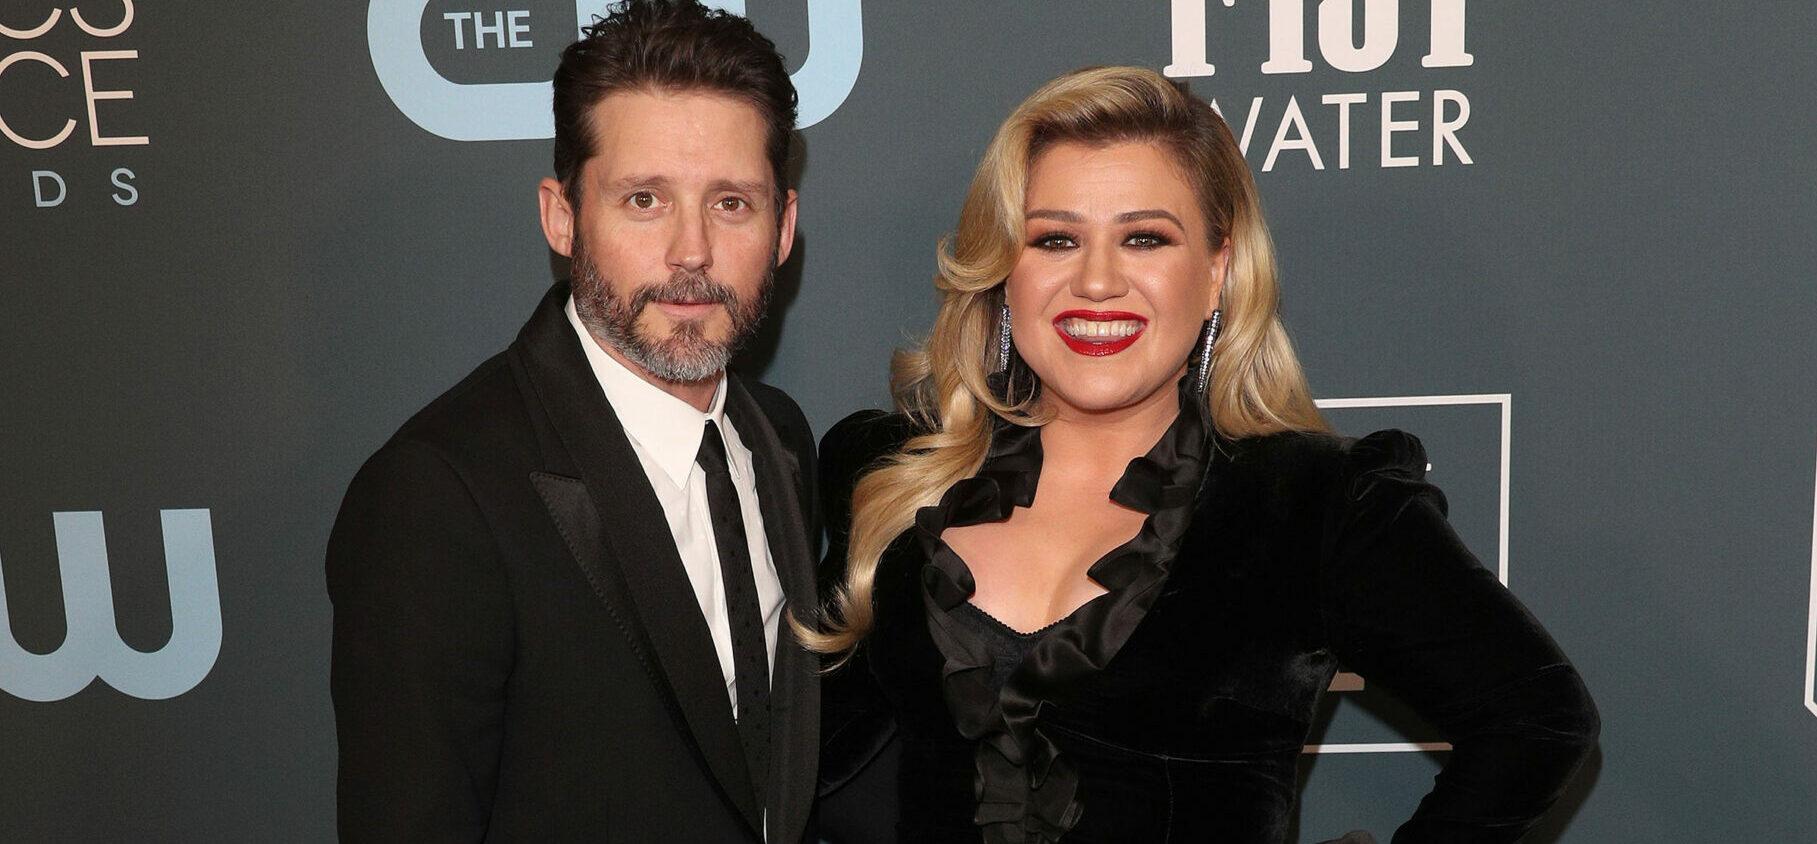 Kelly Clarkson Settles Divorce, Agrees To Vaccinate Kids Against COVID-19